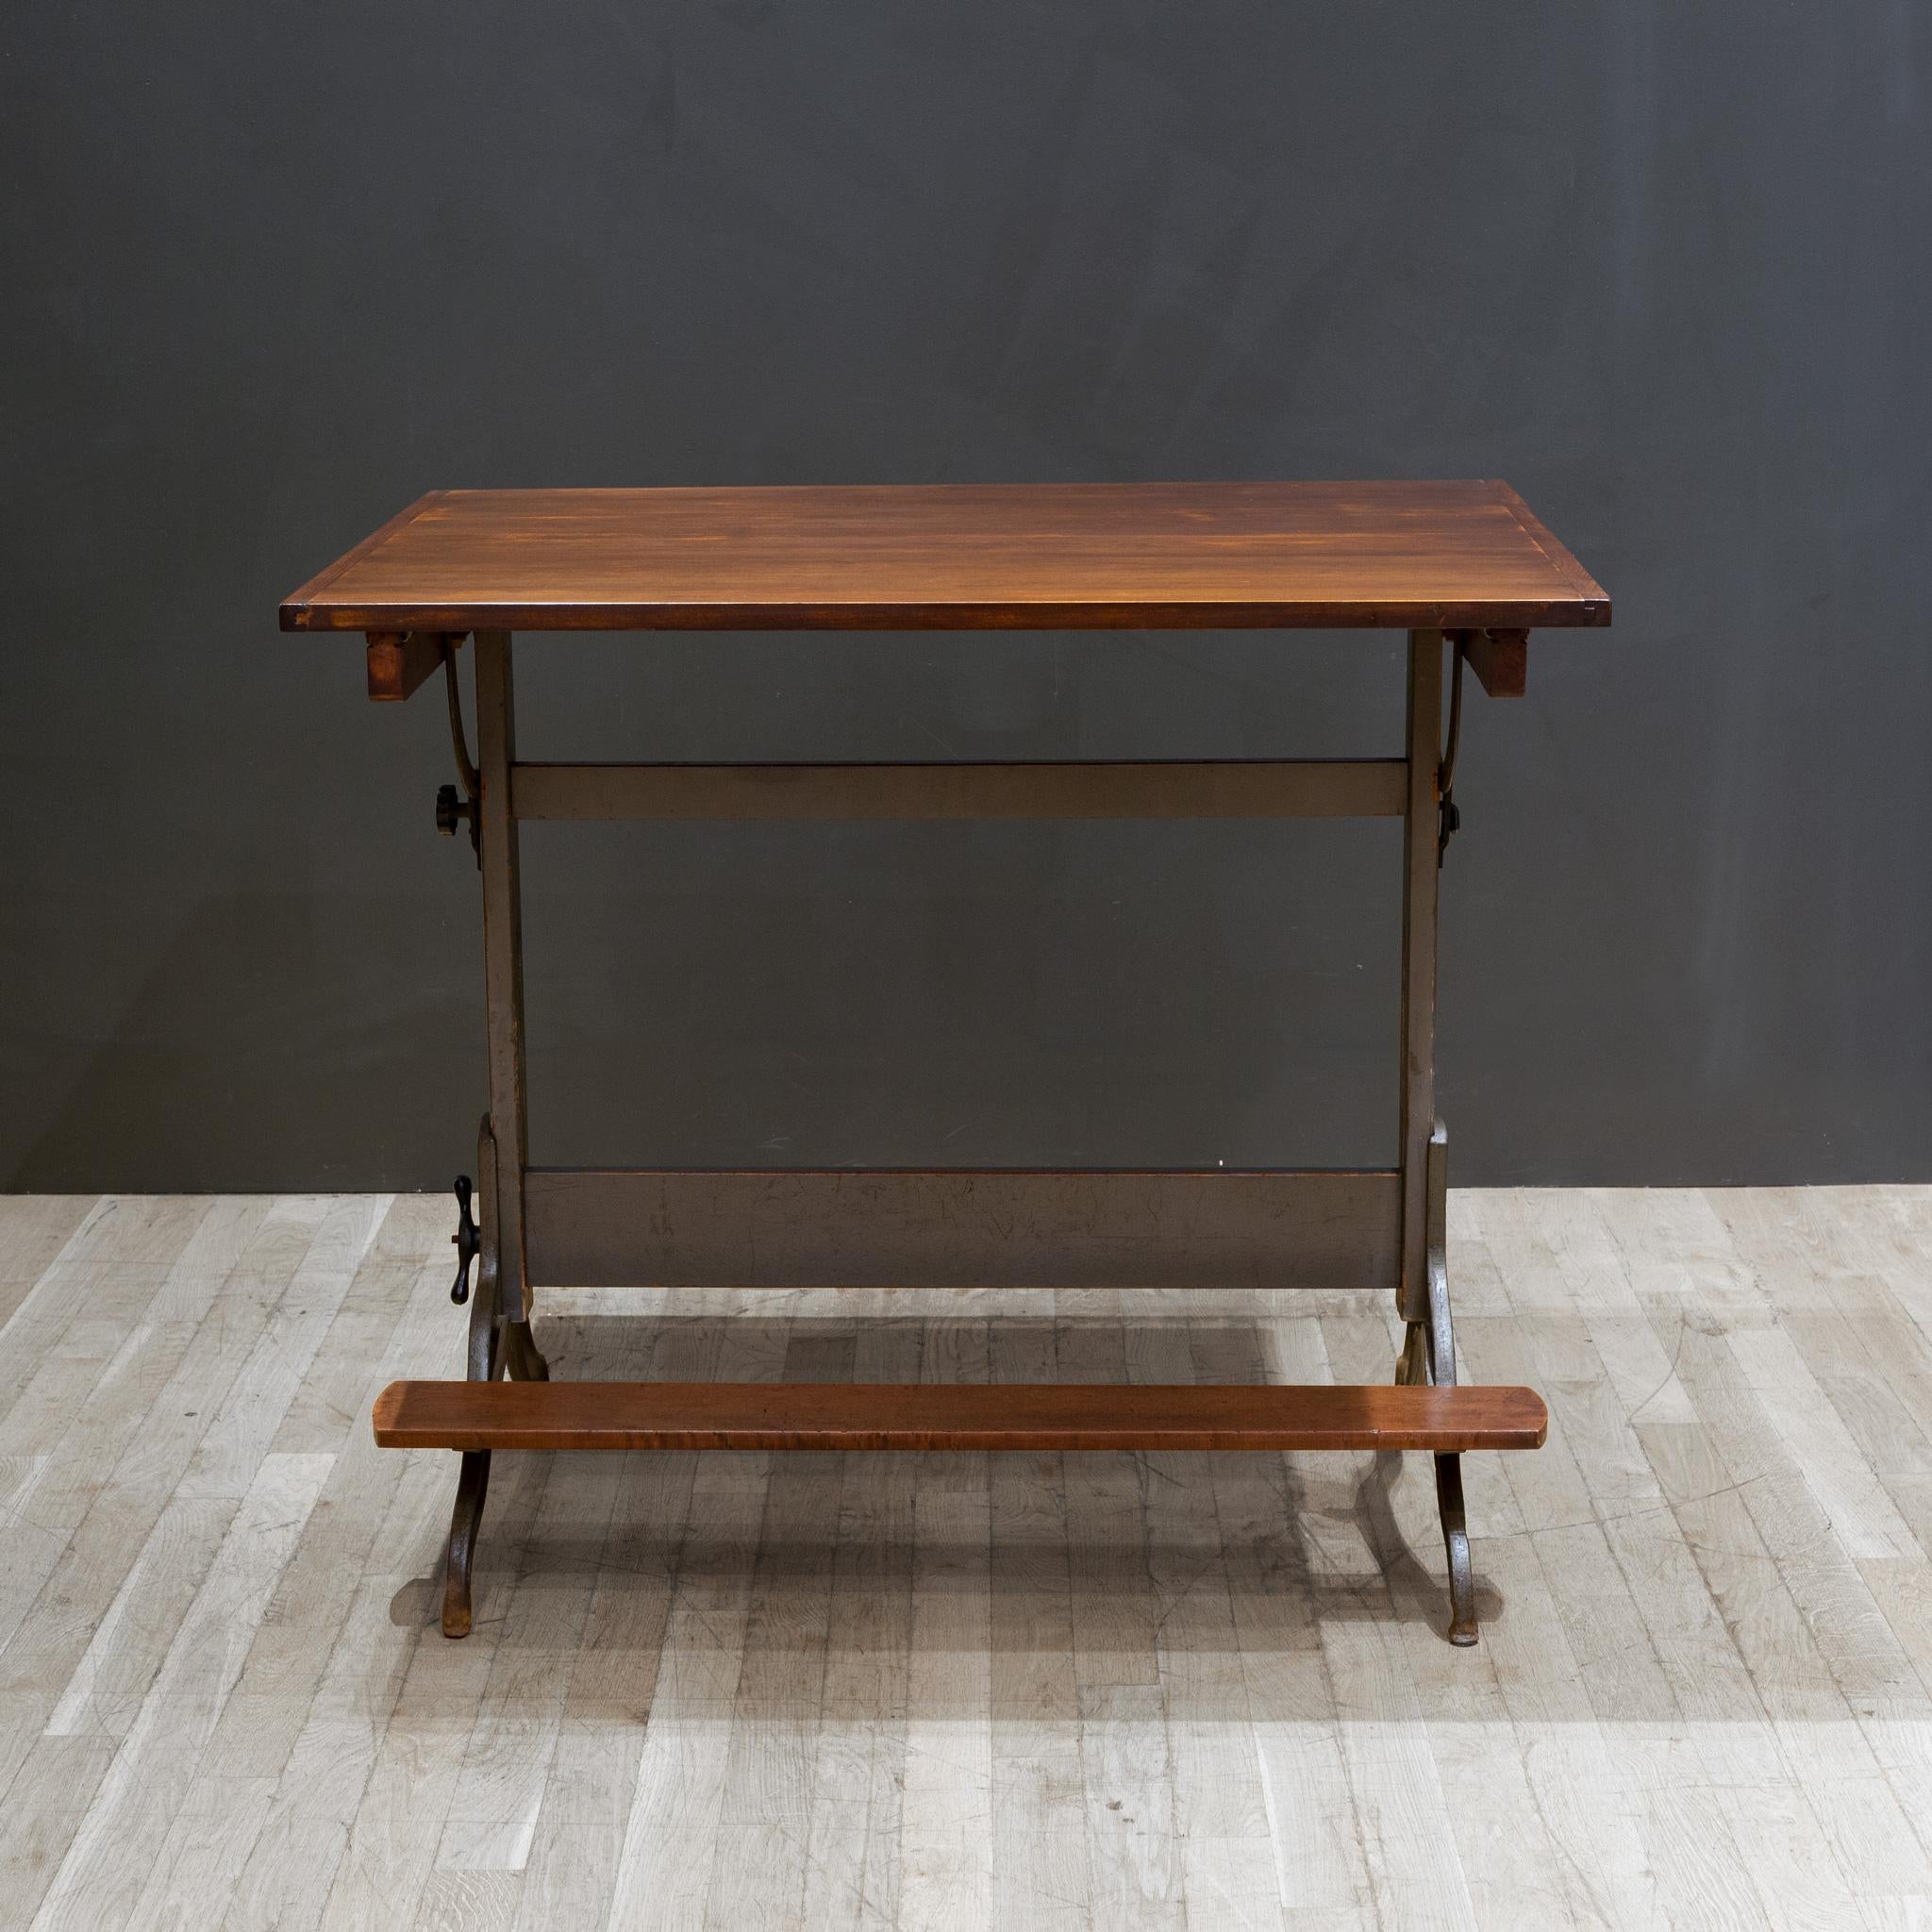 20th Century Antique Hamilton Mfg. Co. Drafting Table with Footrest c.1930 For Sale